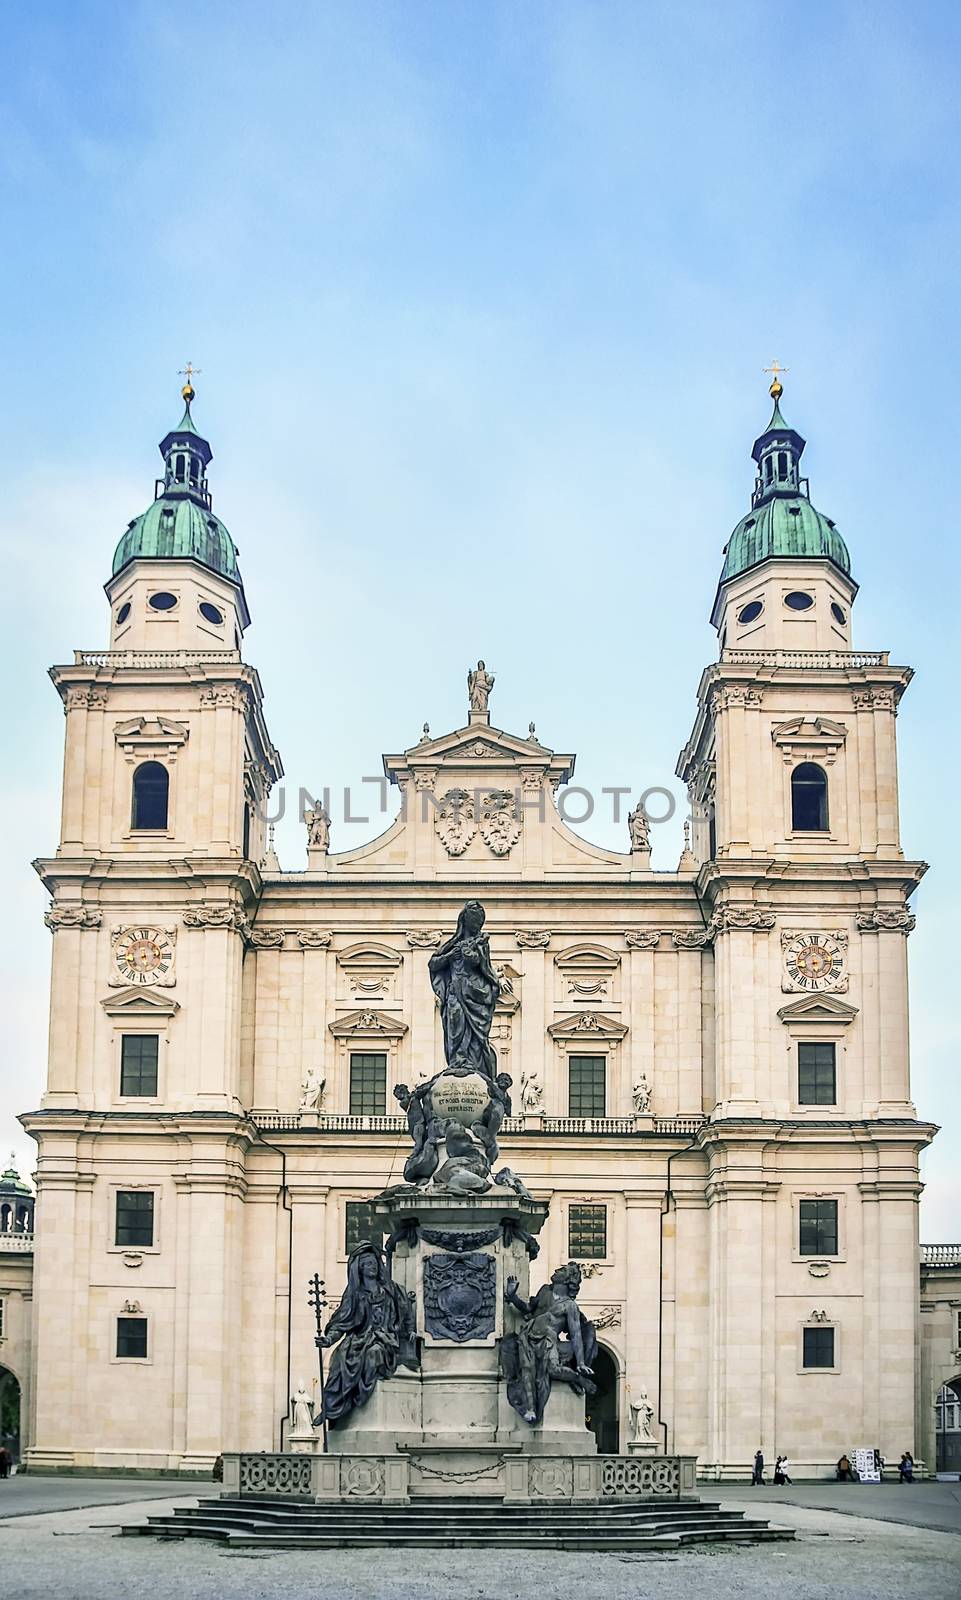 Salzburg Cathedral is a seventeenth-century Baroque cathedral of the Roman Catholic Archdiocese of Salzburg in the city of Salzburg, Austria